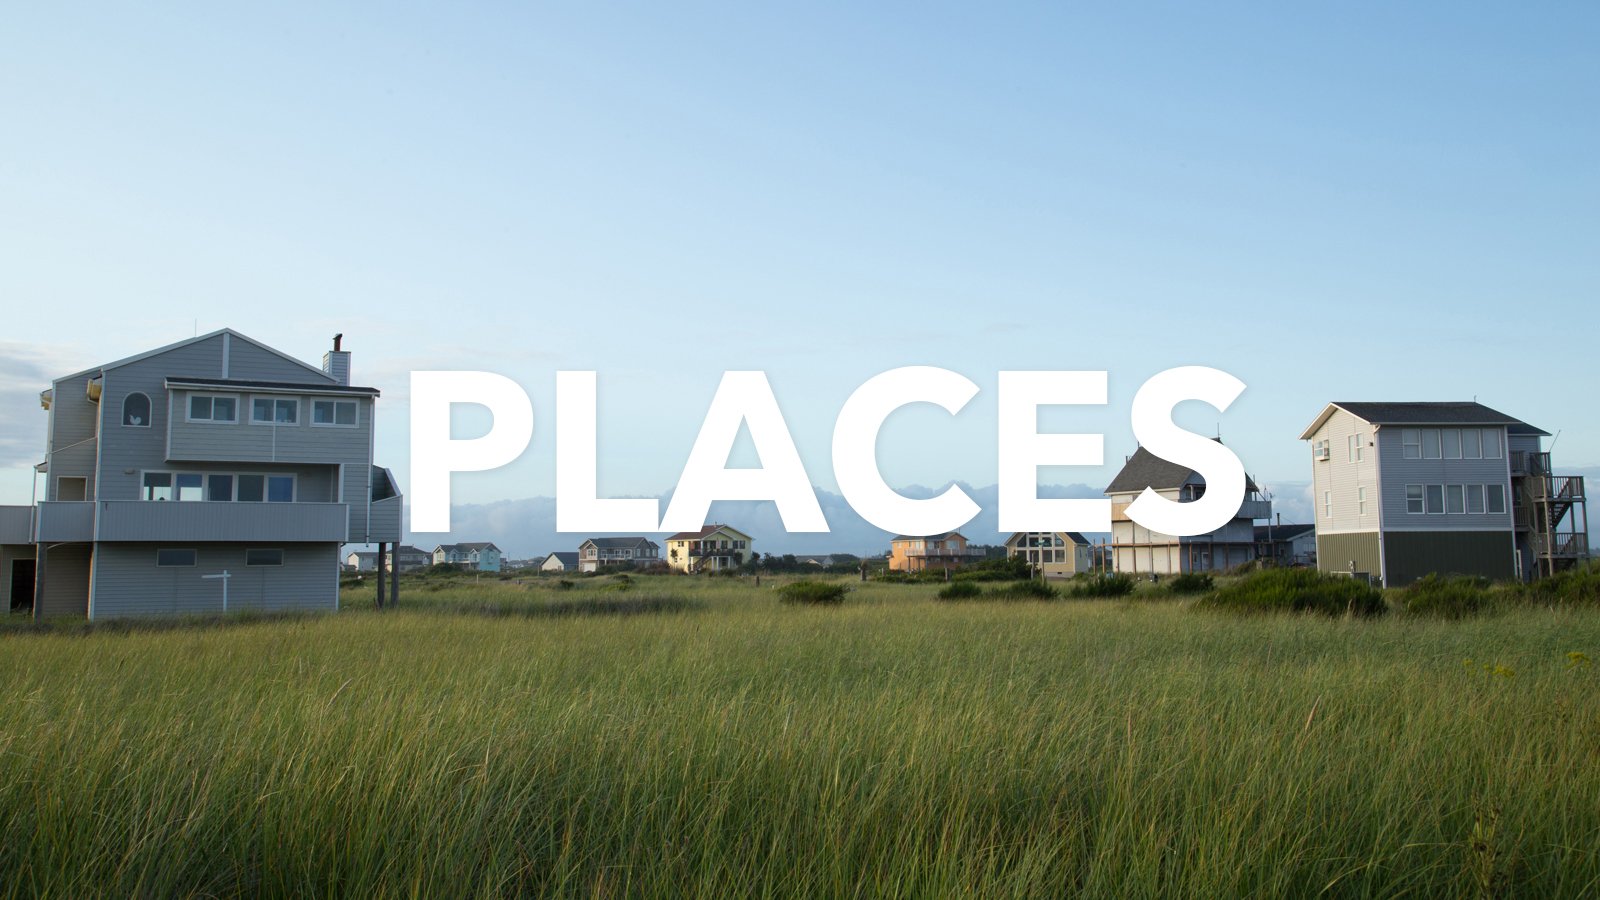 PLACES - Solace+in+a+Strange+World-16x9.jpg